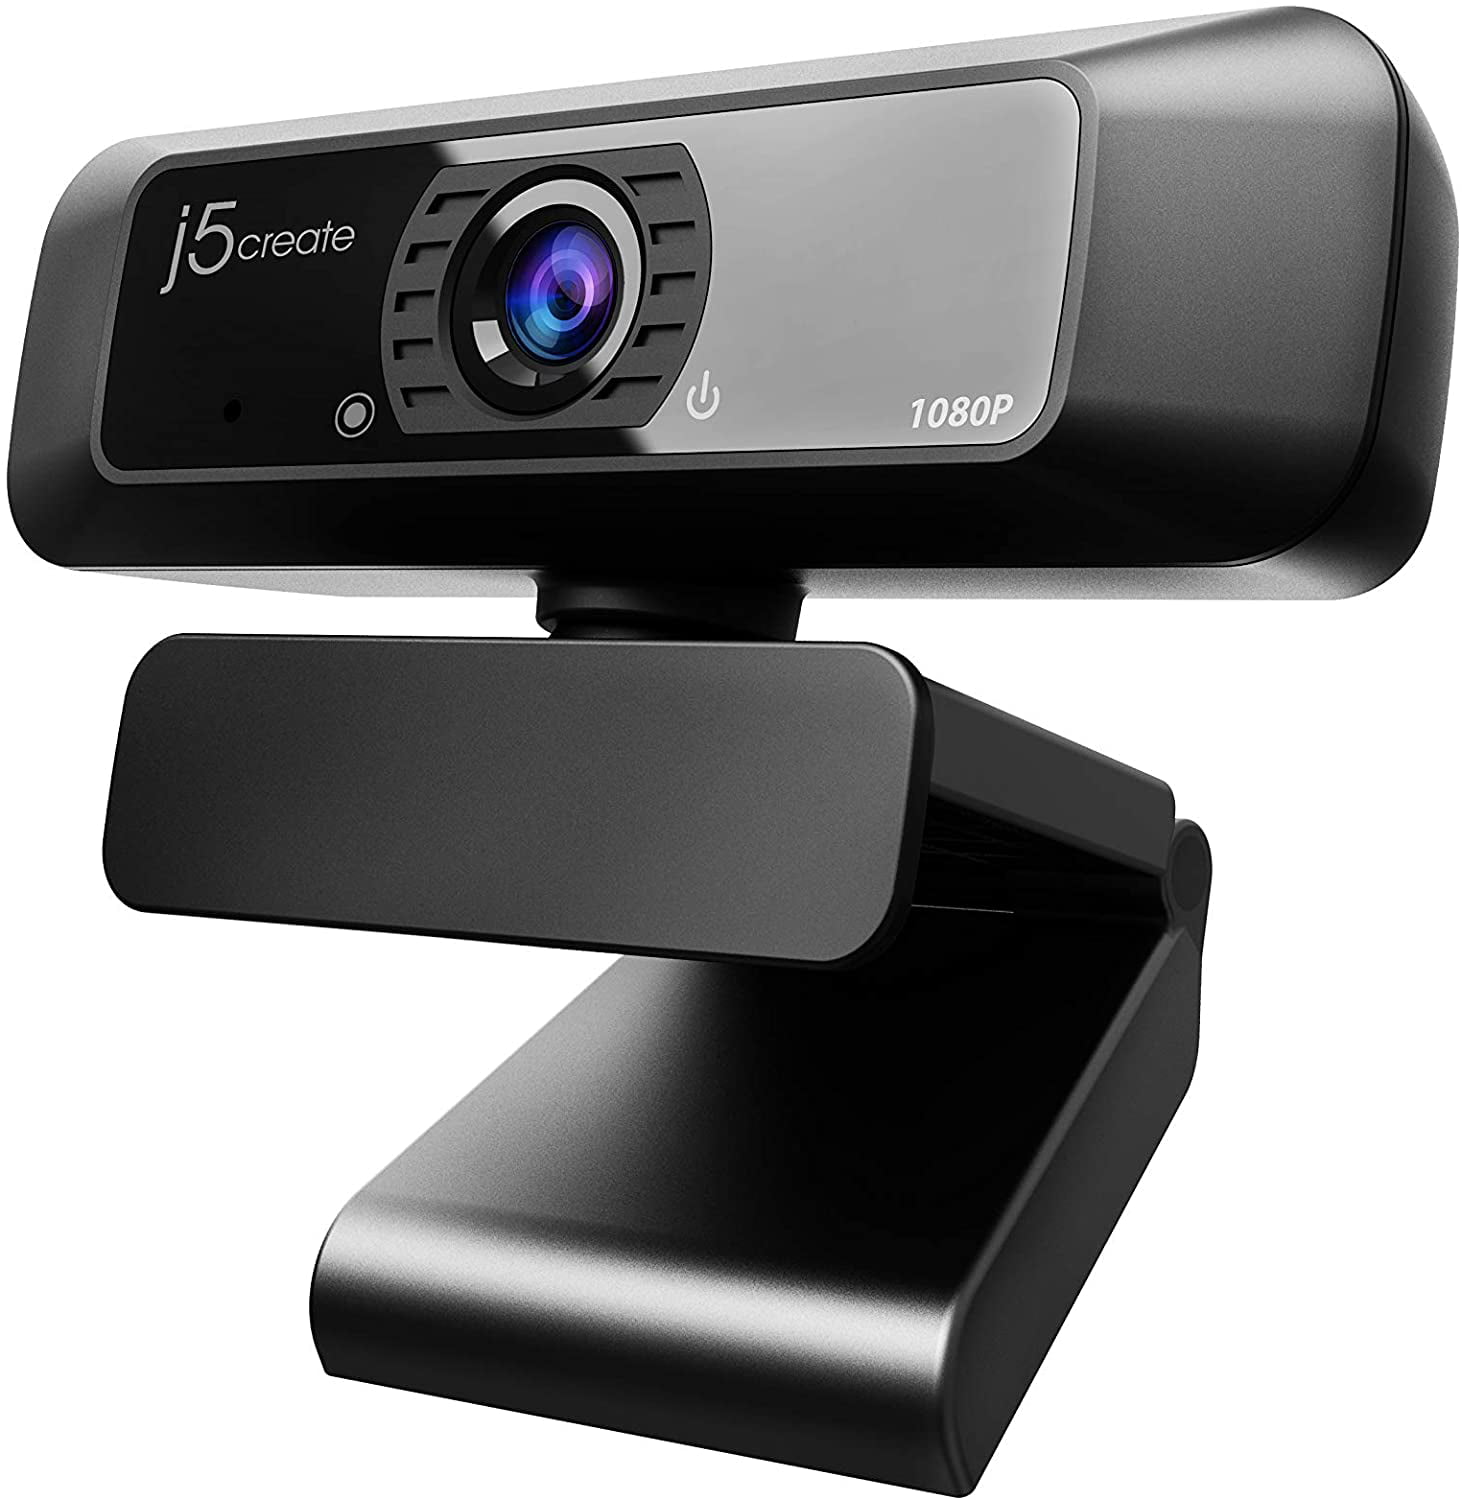 j5create USB Streaming Webcam - 1080P HD with 360° Rotation, High Fidelity  Microphone, Plug and Play for 